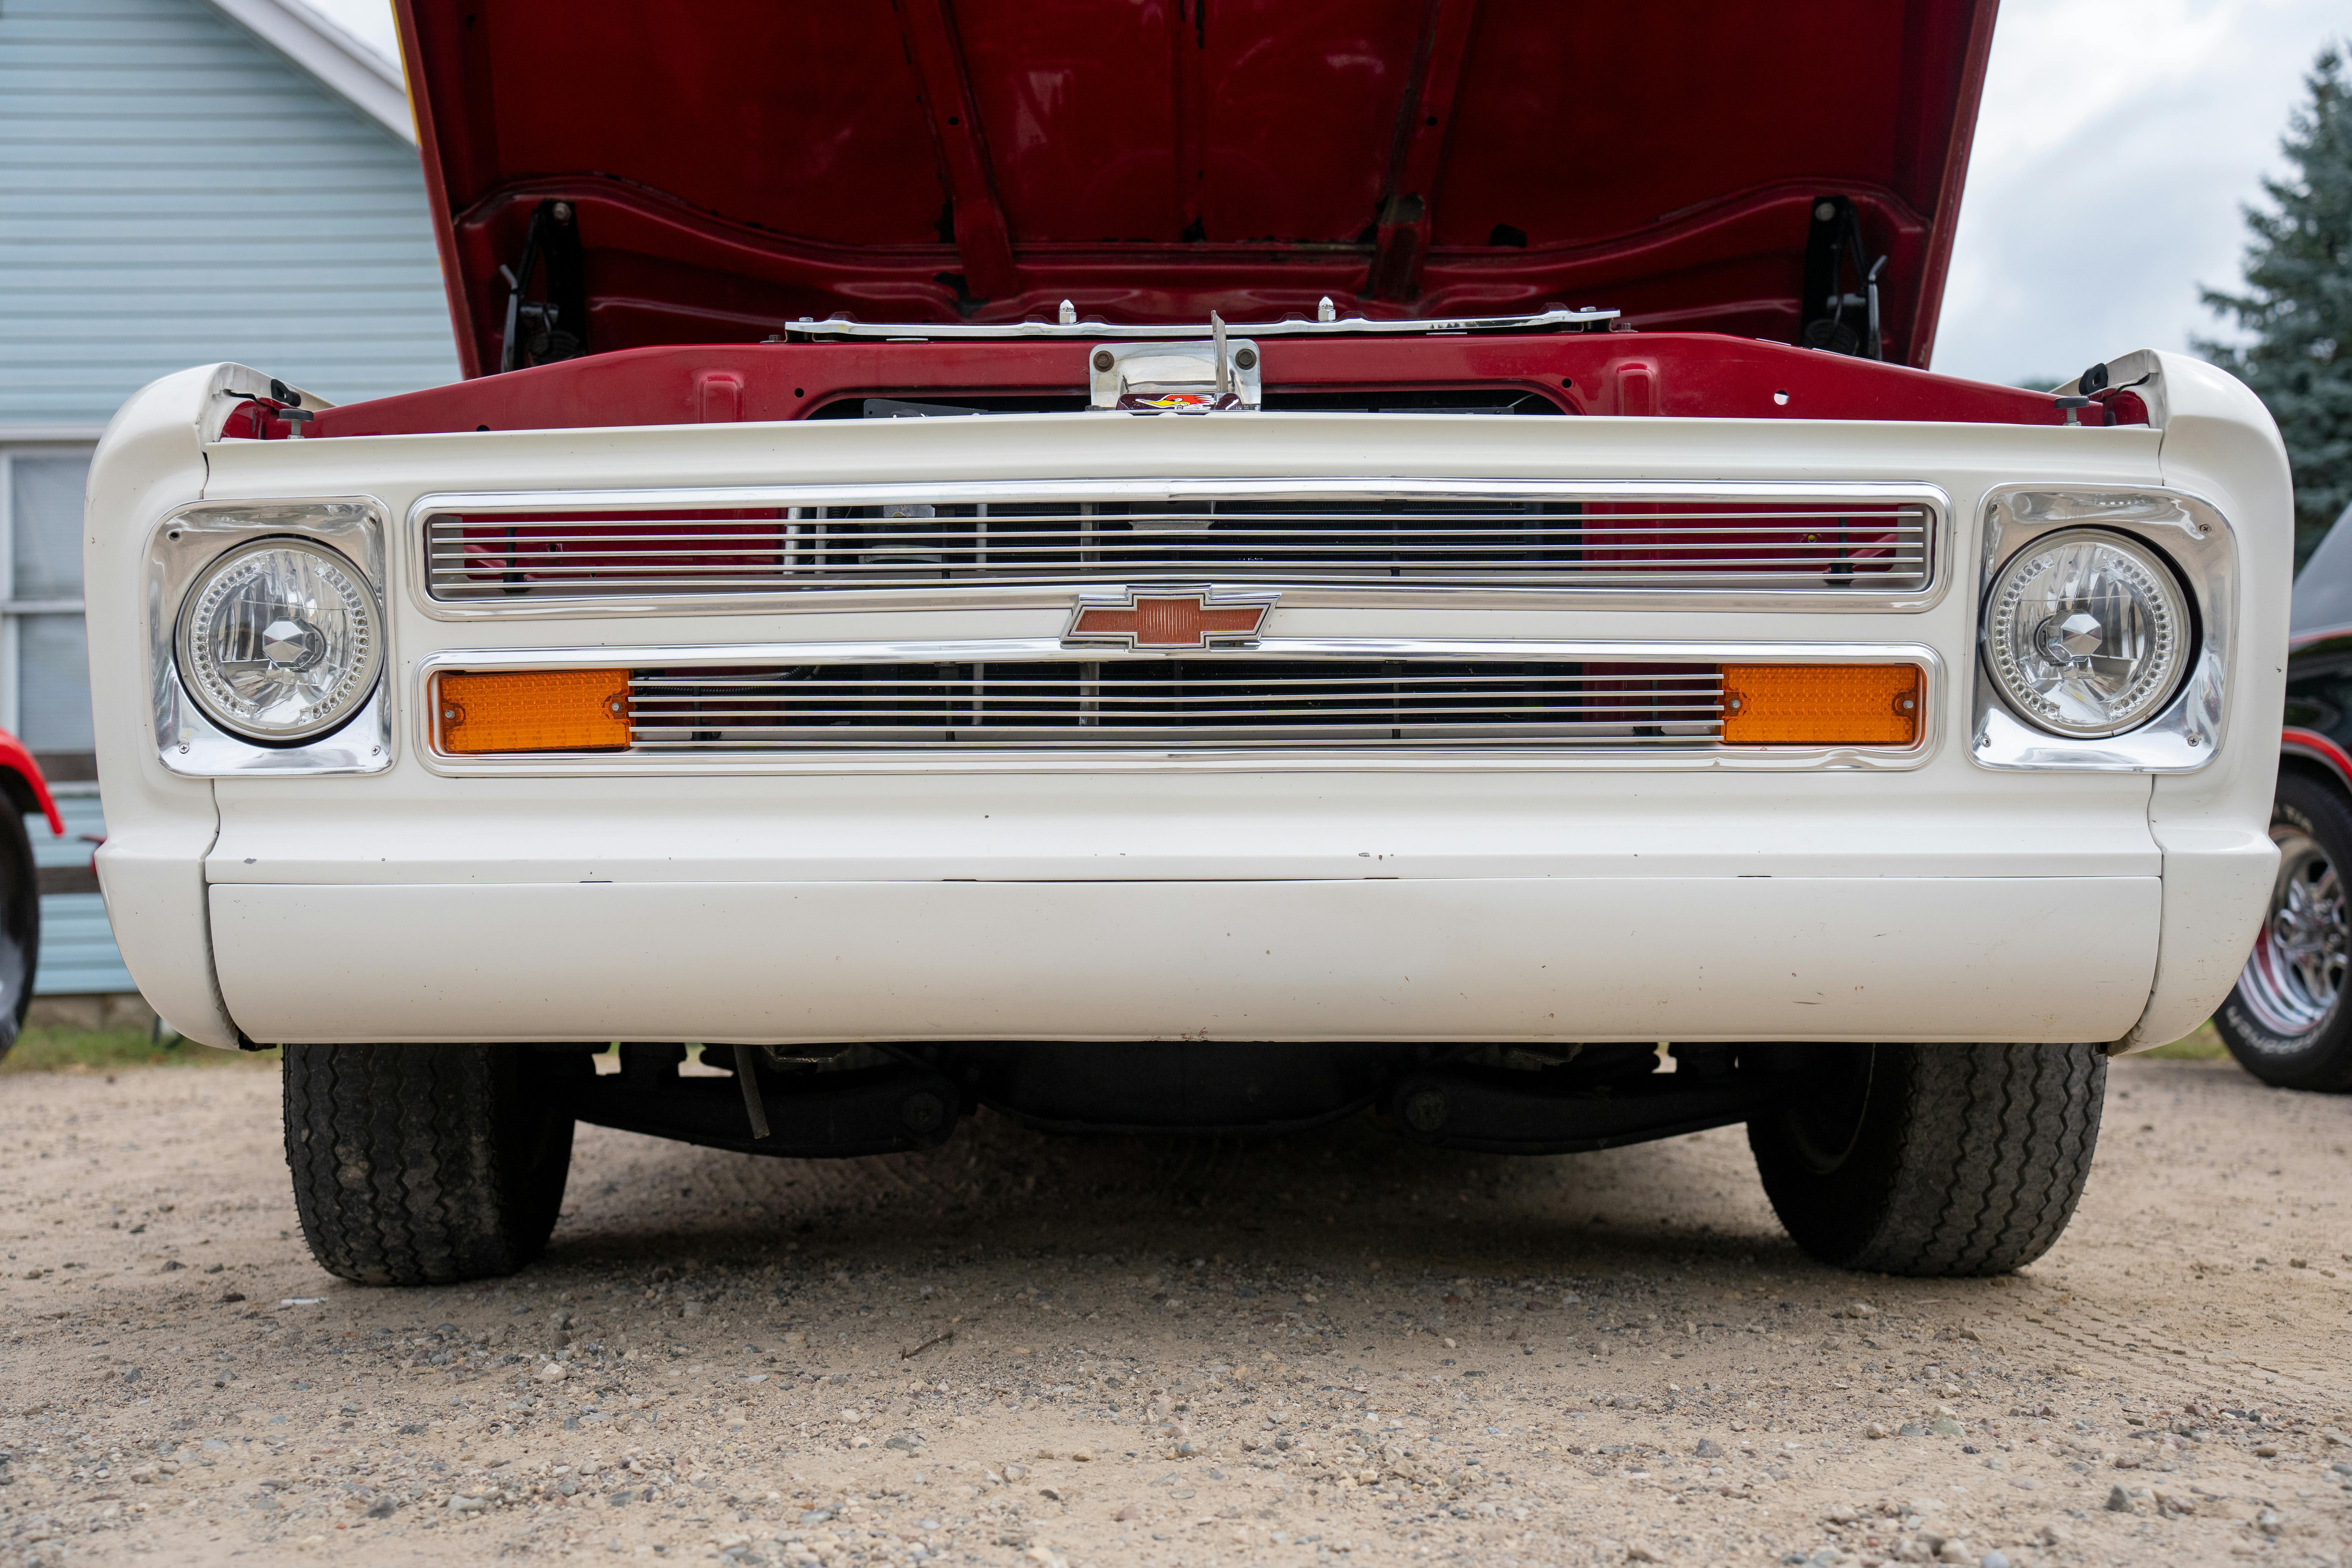 Grille of Old-fashioned Chevy · Free Stock Photo